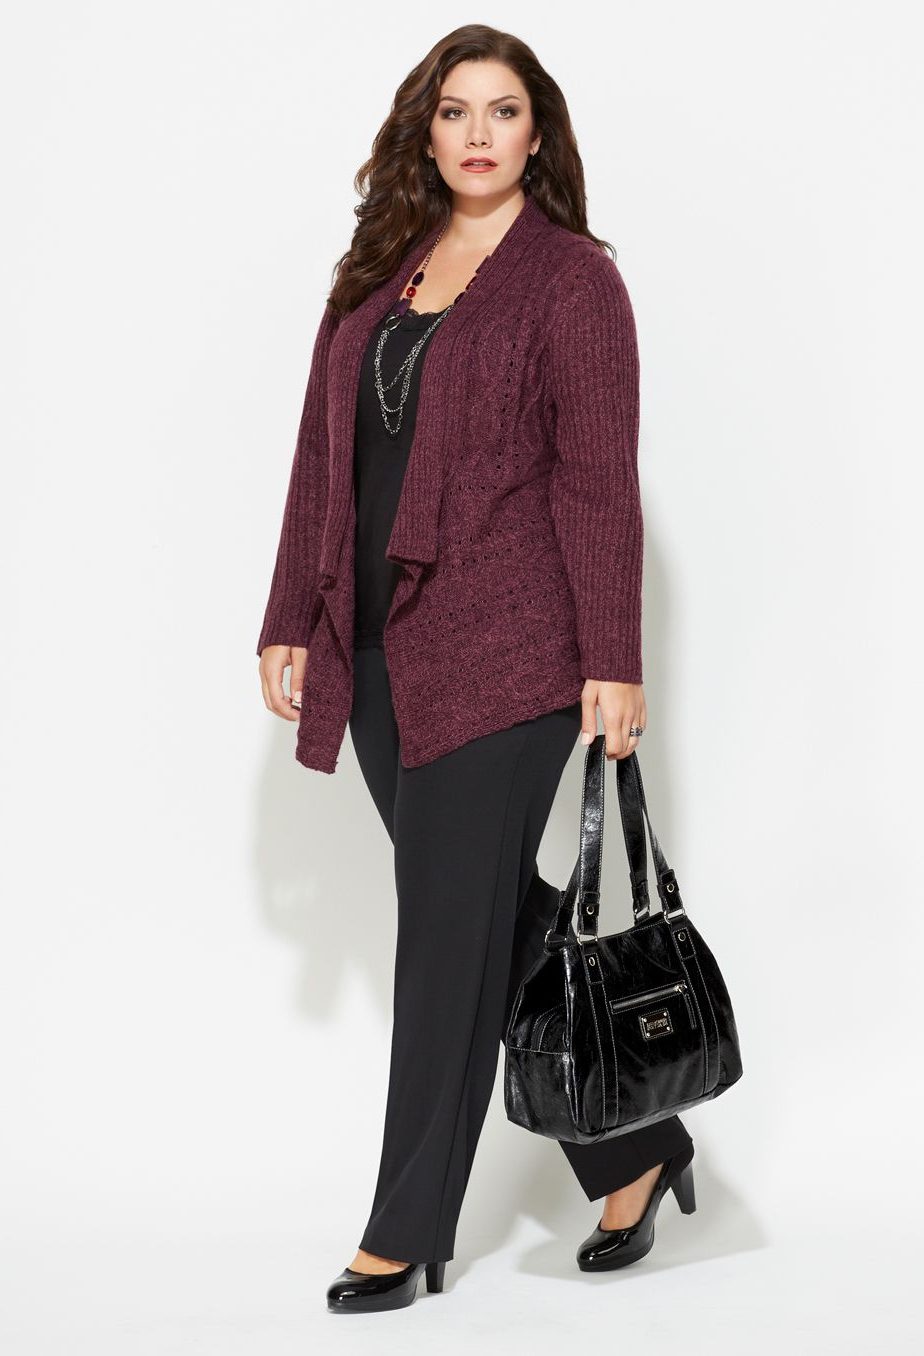 Classic business wear... e1601672563201 115+ Elegant Work Outfit Ideas for Plus Size Ladies - 2